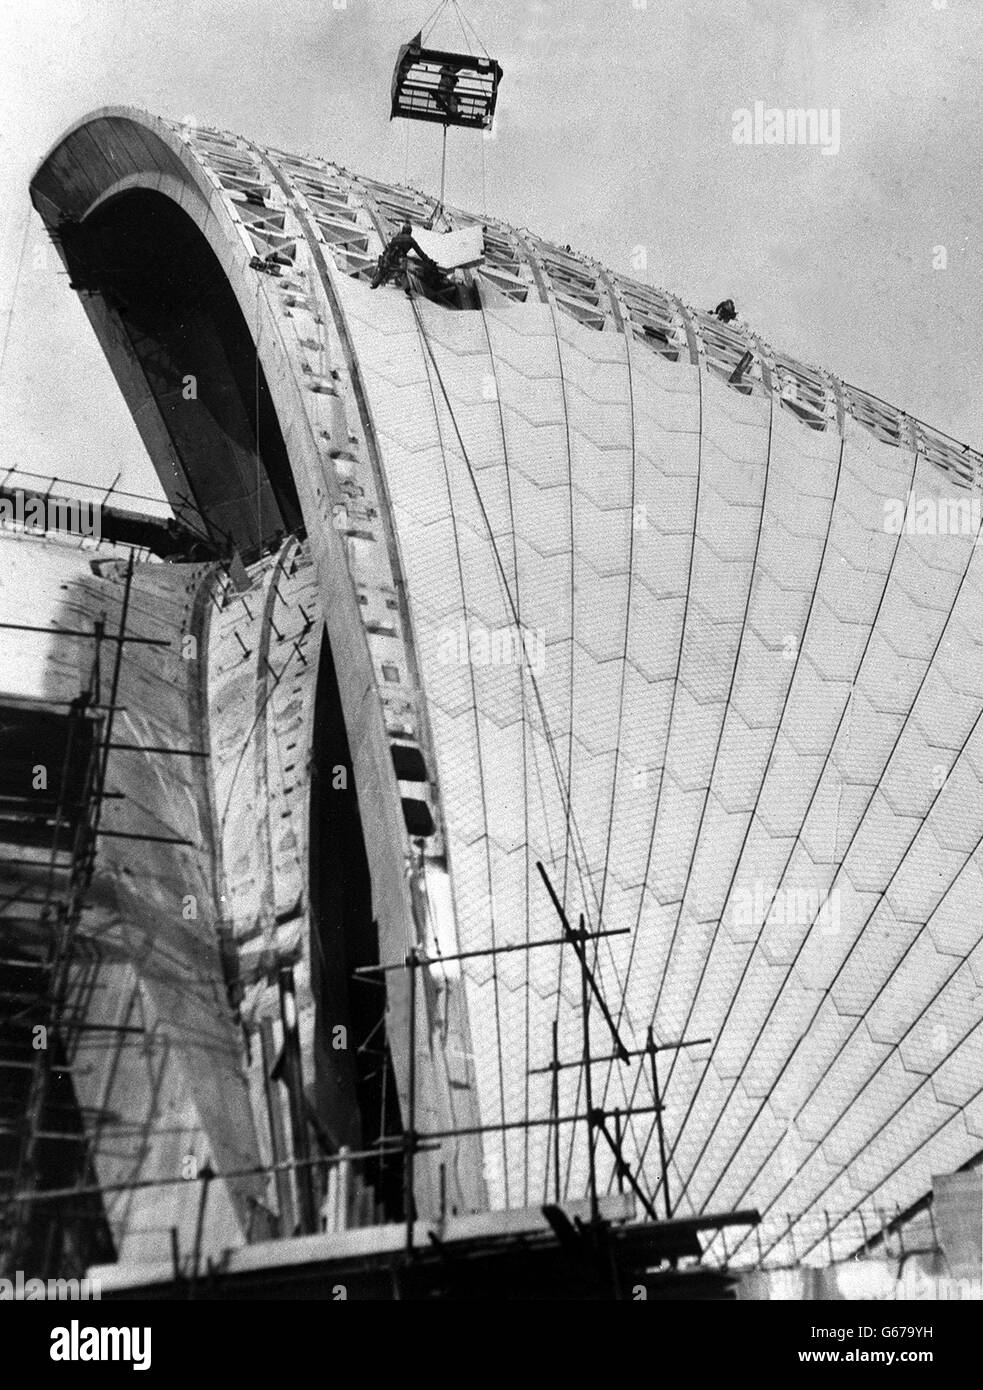 Workmen use a big crane to swing a tile-covered concrete section of the outer casing into place on the Sydney Opera House. More than a million gleaming white tiles will be used before the roof is completed by March but already it presents the striking appearance of soaring white shells reaching out skywards. Construction of the building commenced in March 1959 and proceeded in slow stages over the next fourteen years. Stock Photo